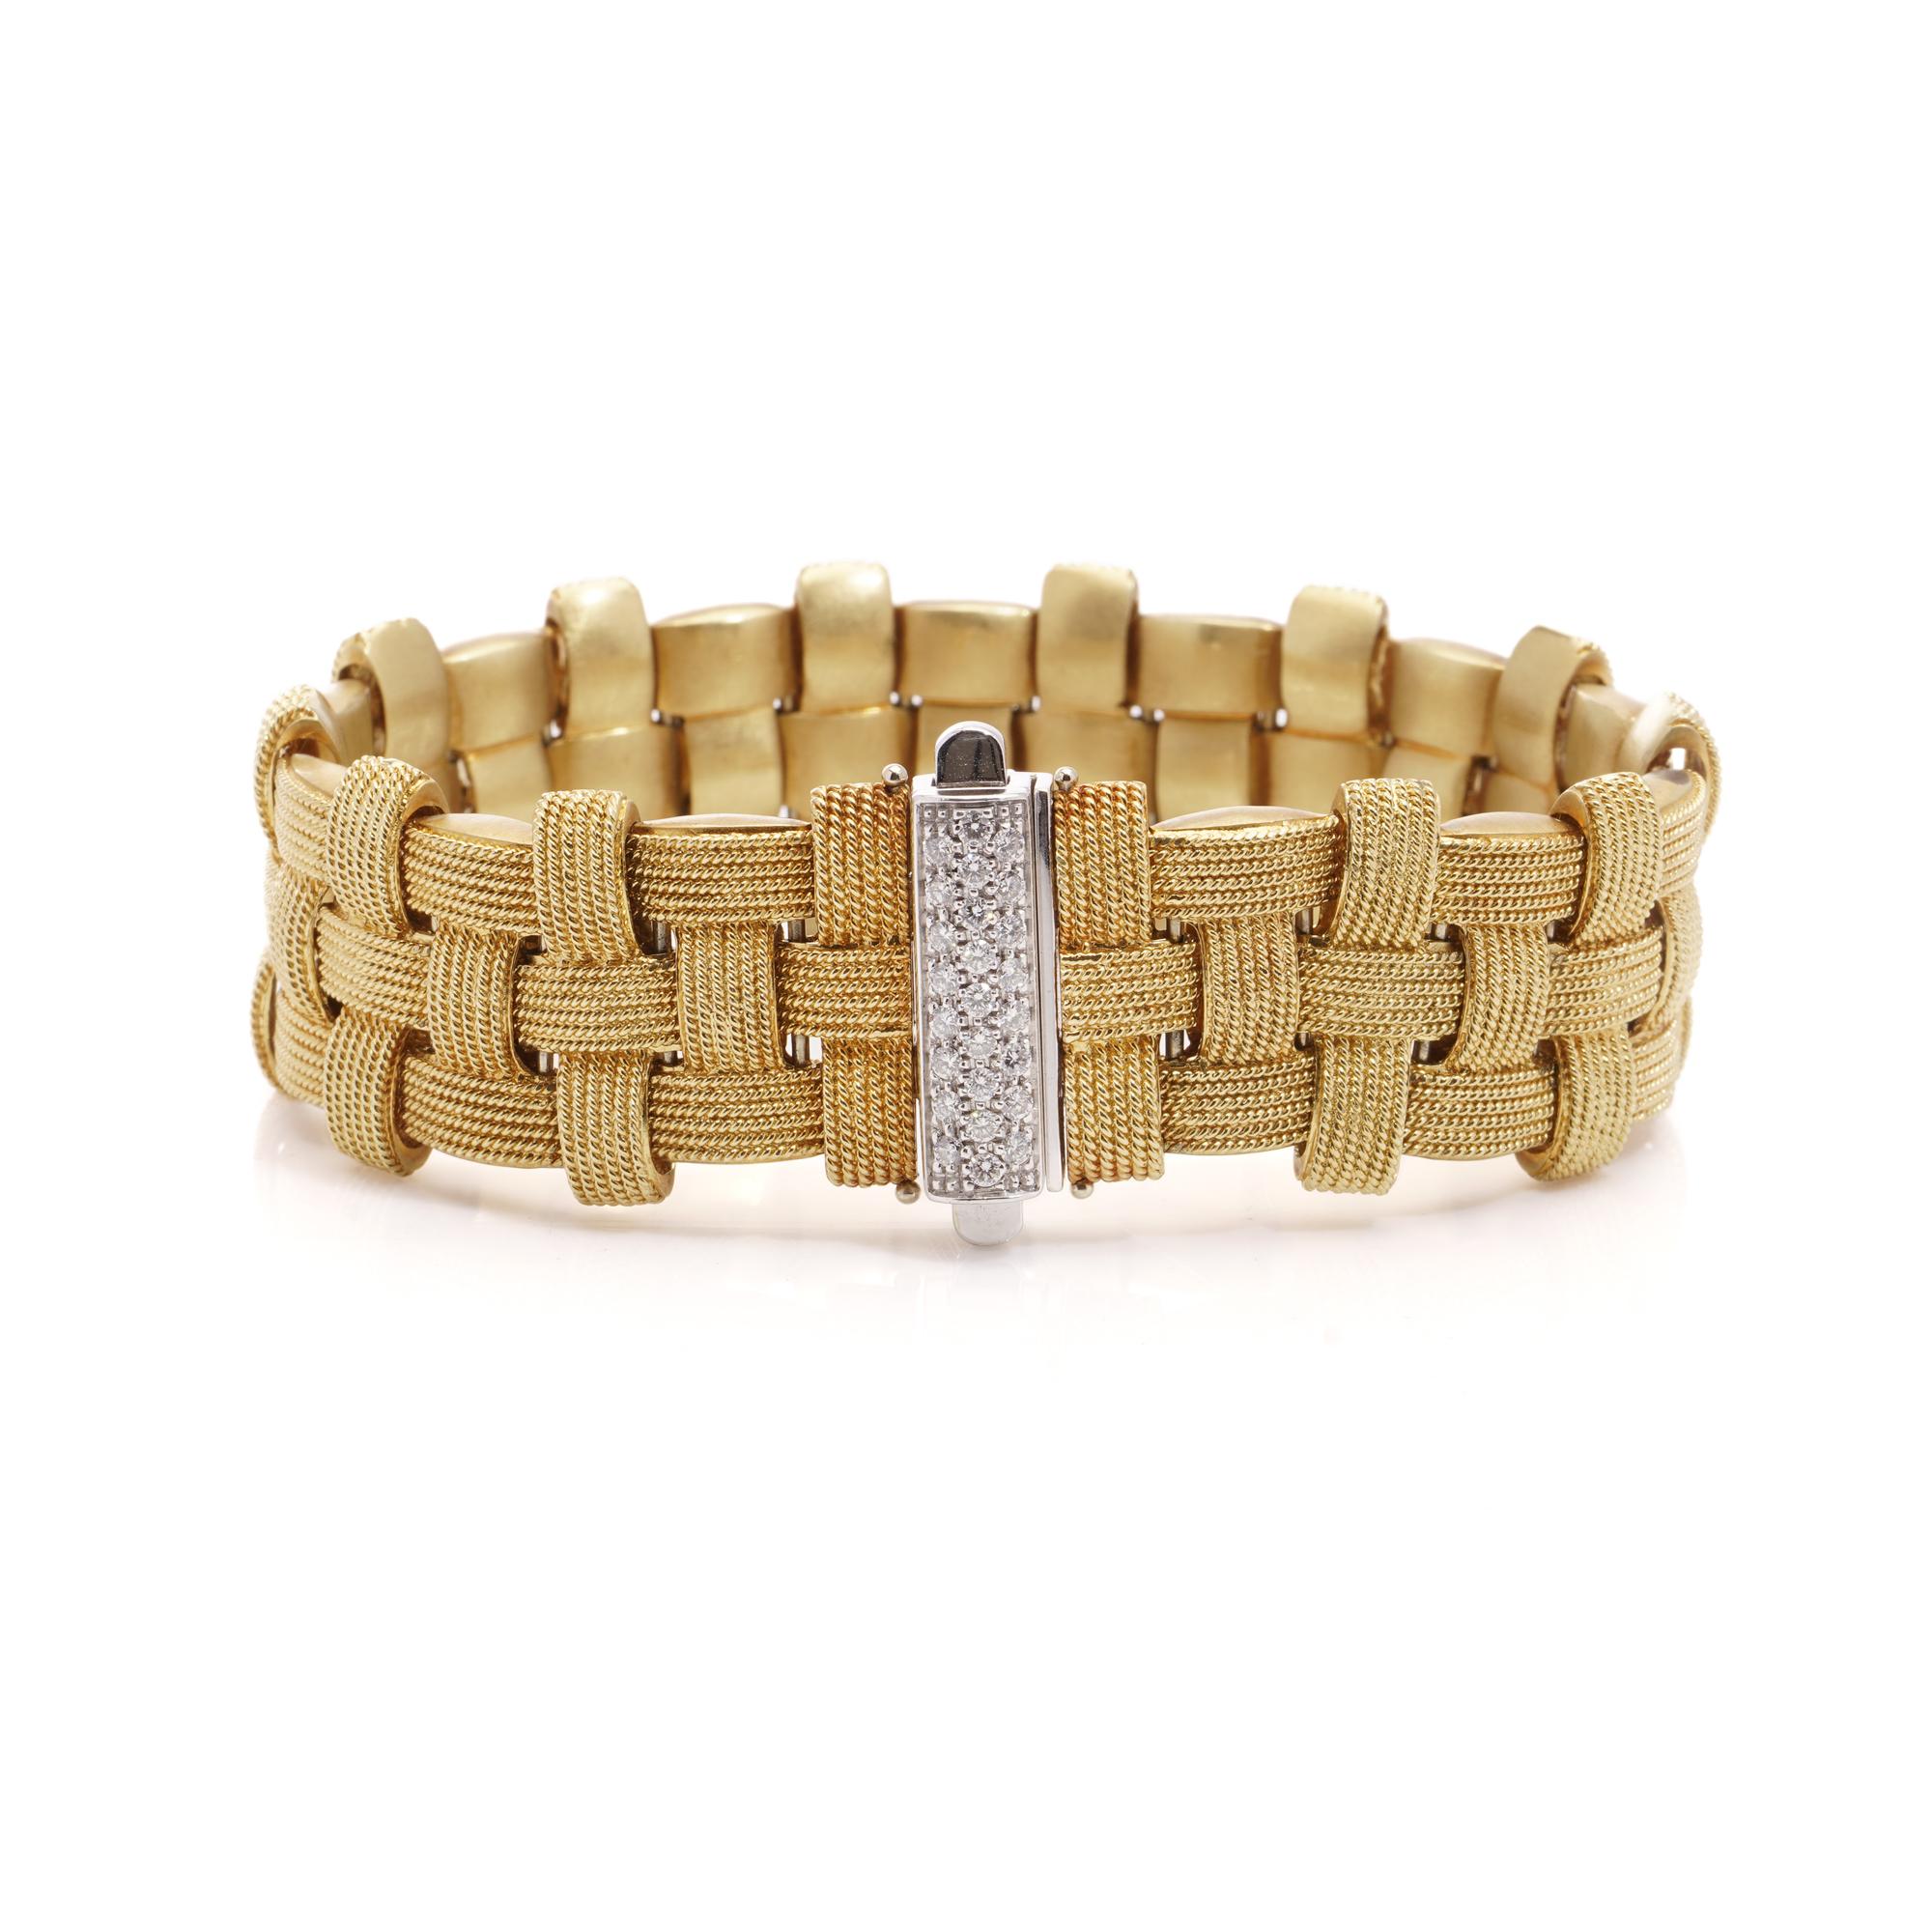 Introducing the epitome of luxury and sophistication, the Roberto Coin 18kt White and Yellow Gold Appasionata Woven Design Bracelet crafted by the renowned Italian jeweller Roberto Coin. 

Imported to England, Birmingham, in 2002, this bracelet